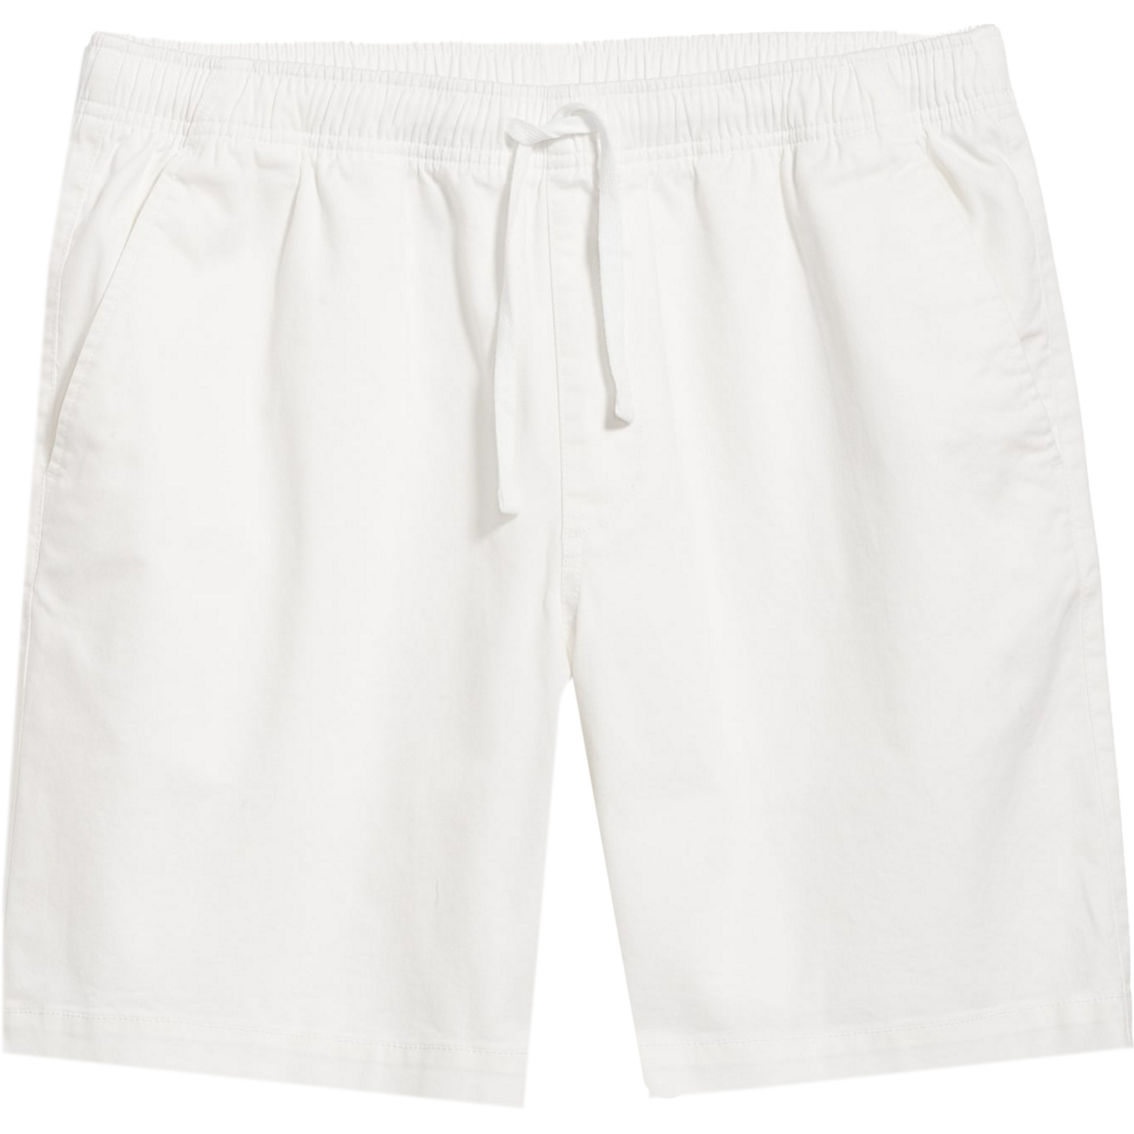 Old Navy 7 in. Jogger Shorts - Image 3 of 4